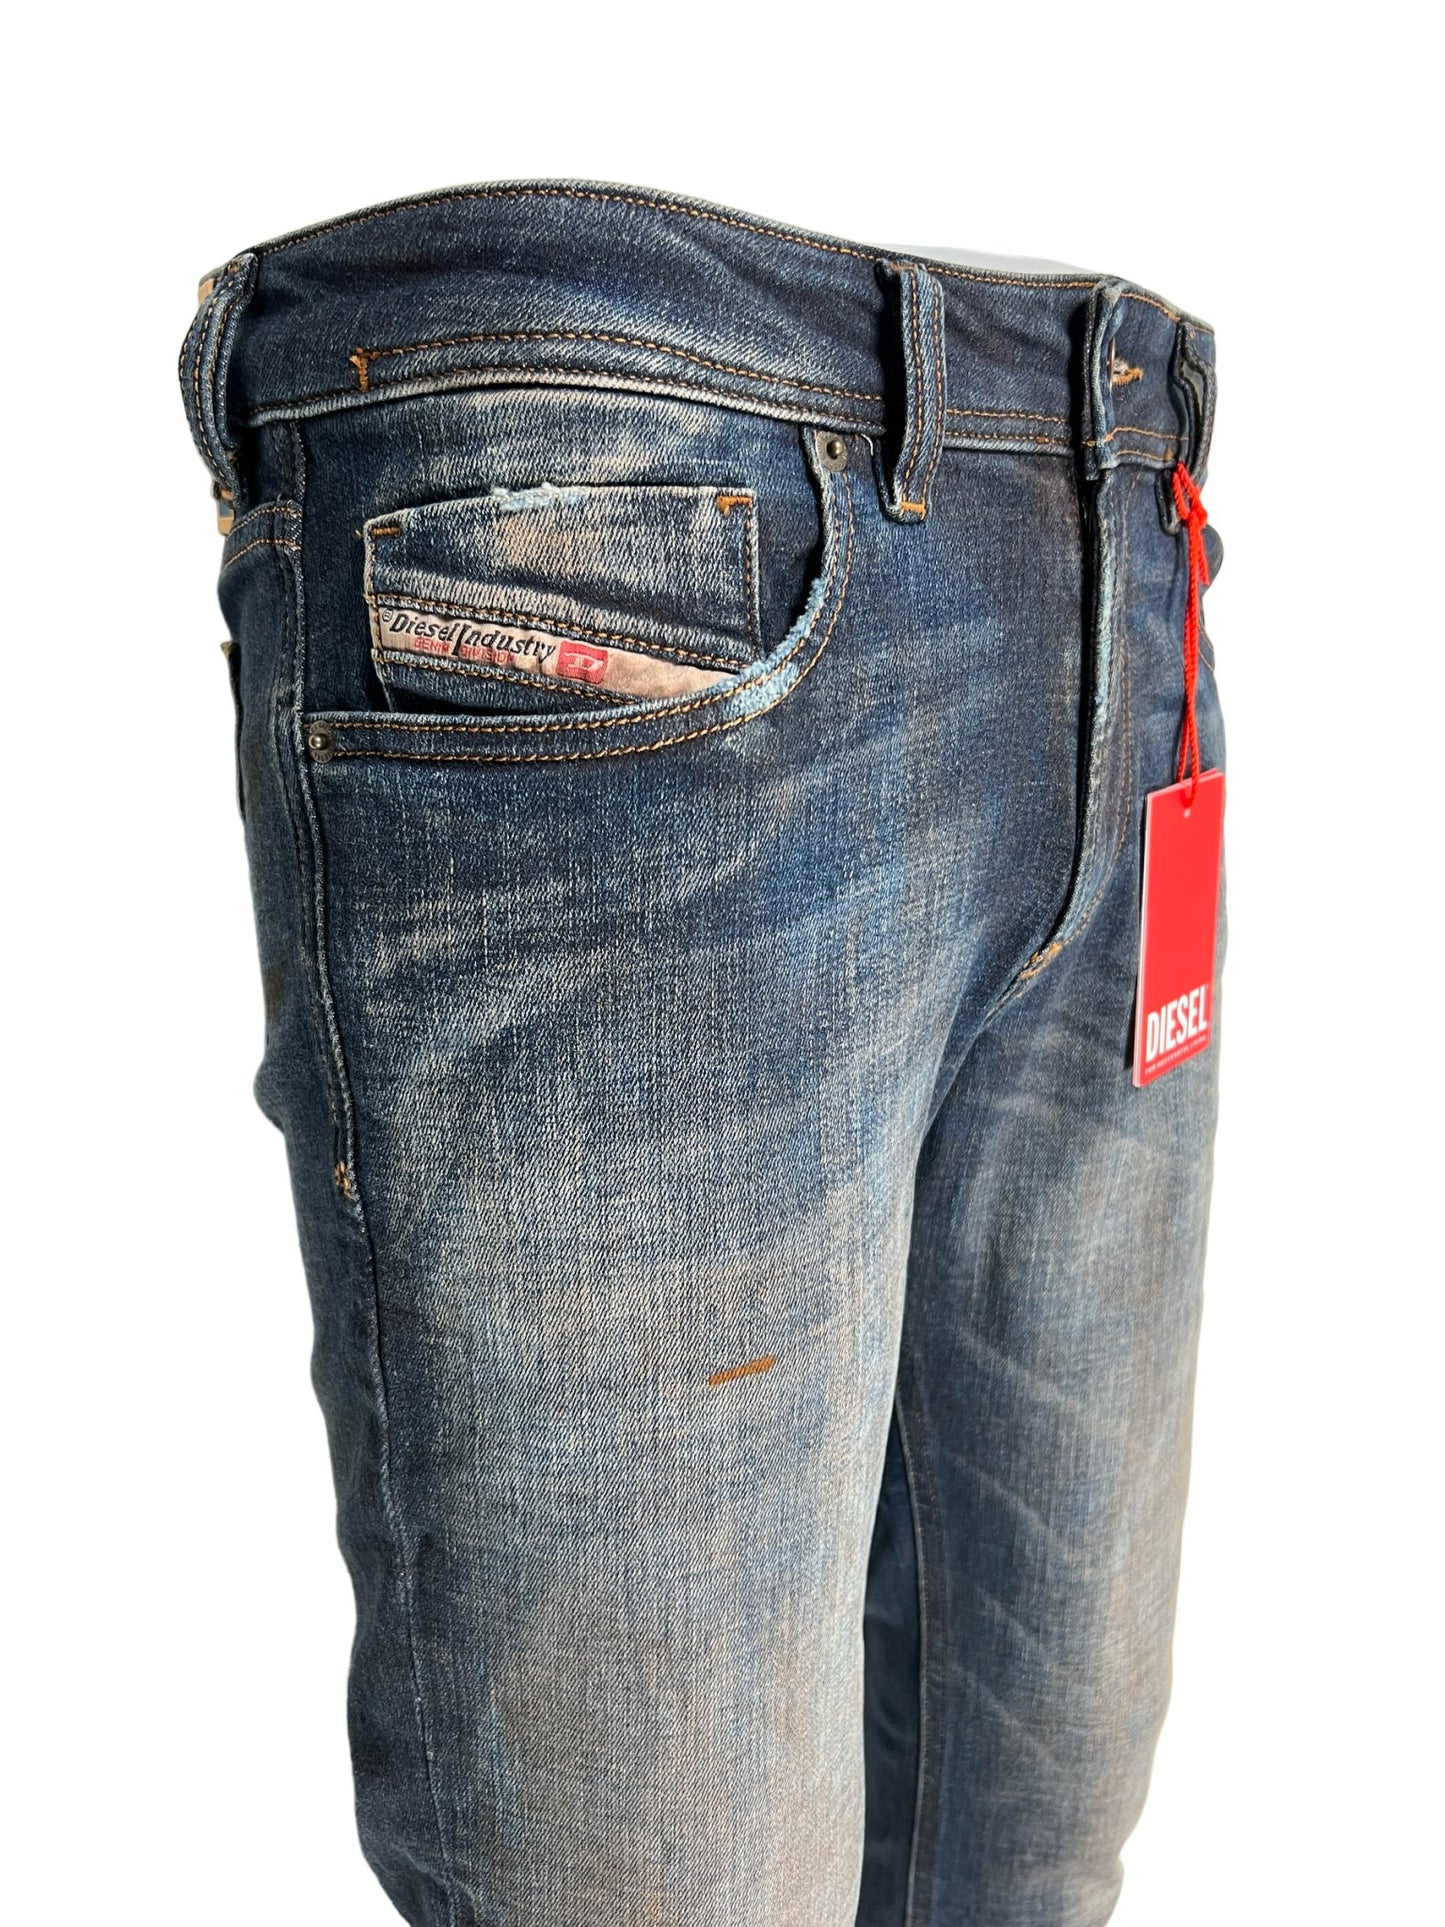 A pair of DIESEL JEANS 1979 SLEENKER 9H76 skinny style jeans with a tag on the back.